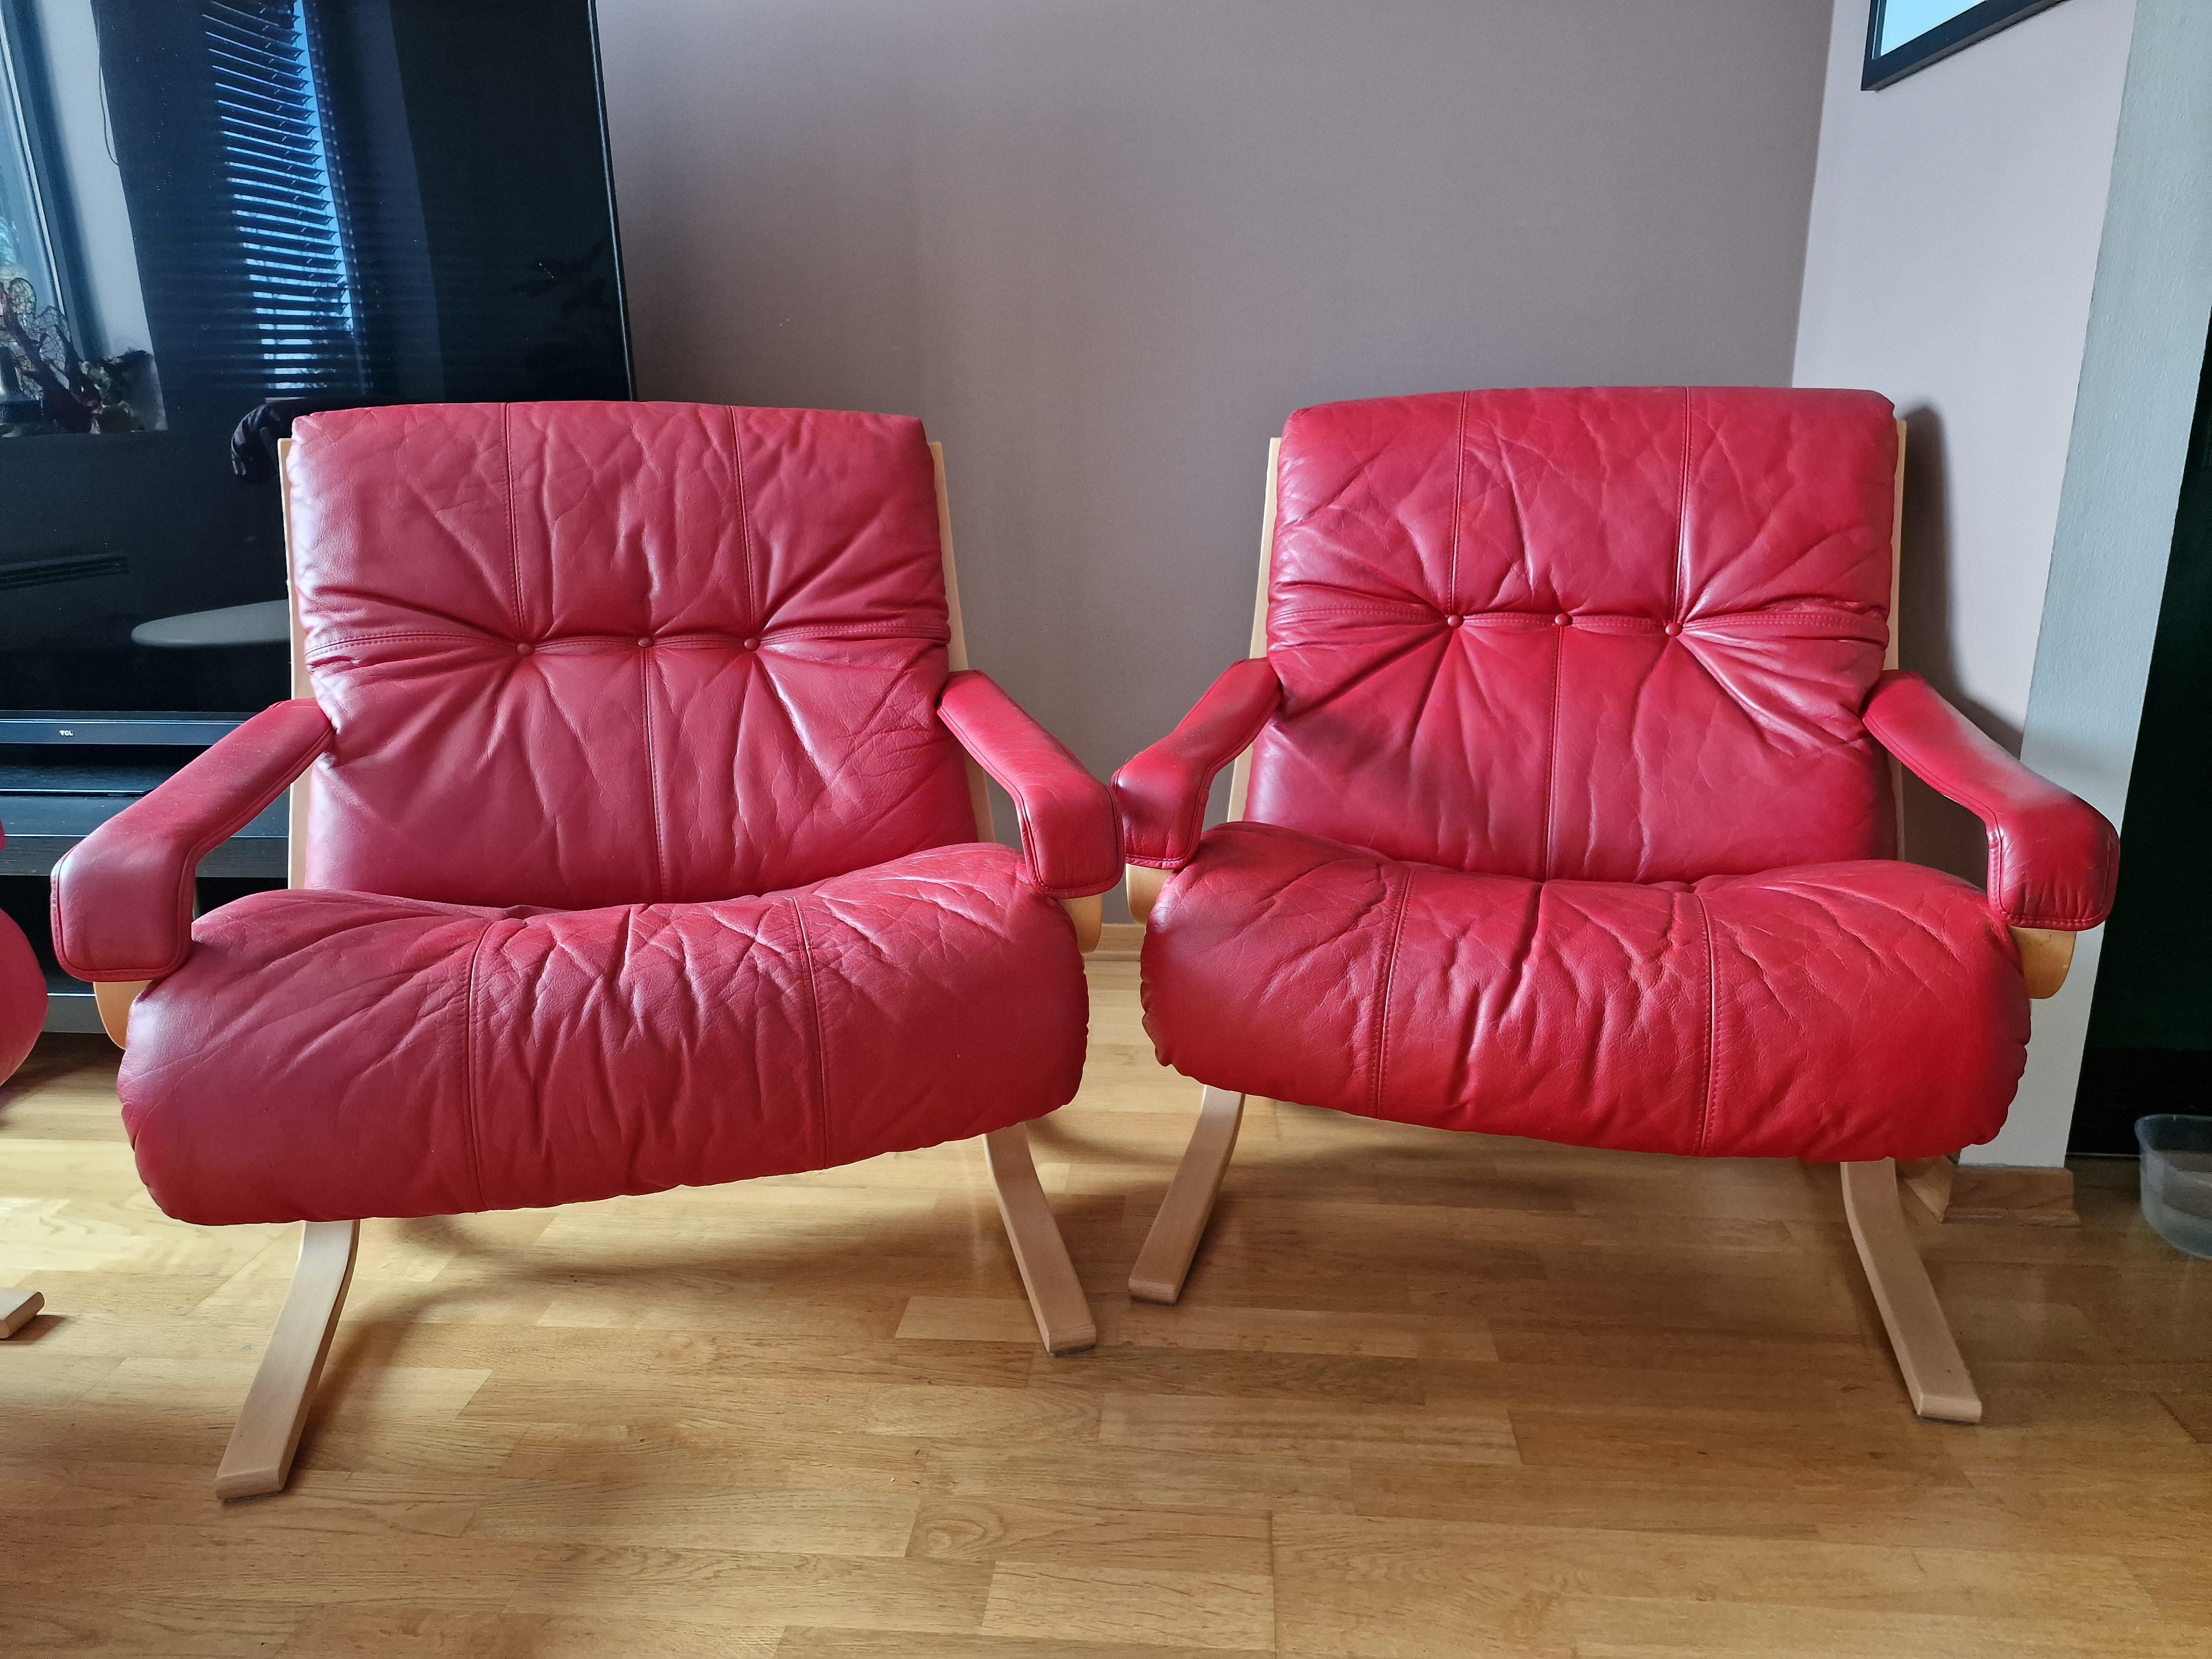 1960s midcentury Siesta lounge chair by Norwegian designer Ingmar Relling for Westnofa Furniture. Bentwood forms, red leather. 
Ingmar Relling won first prize at the Norwegian Furniture Council Competition in 1965 with the 